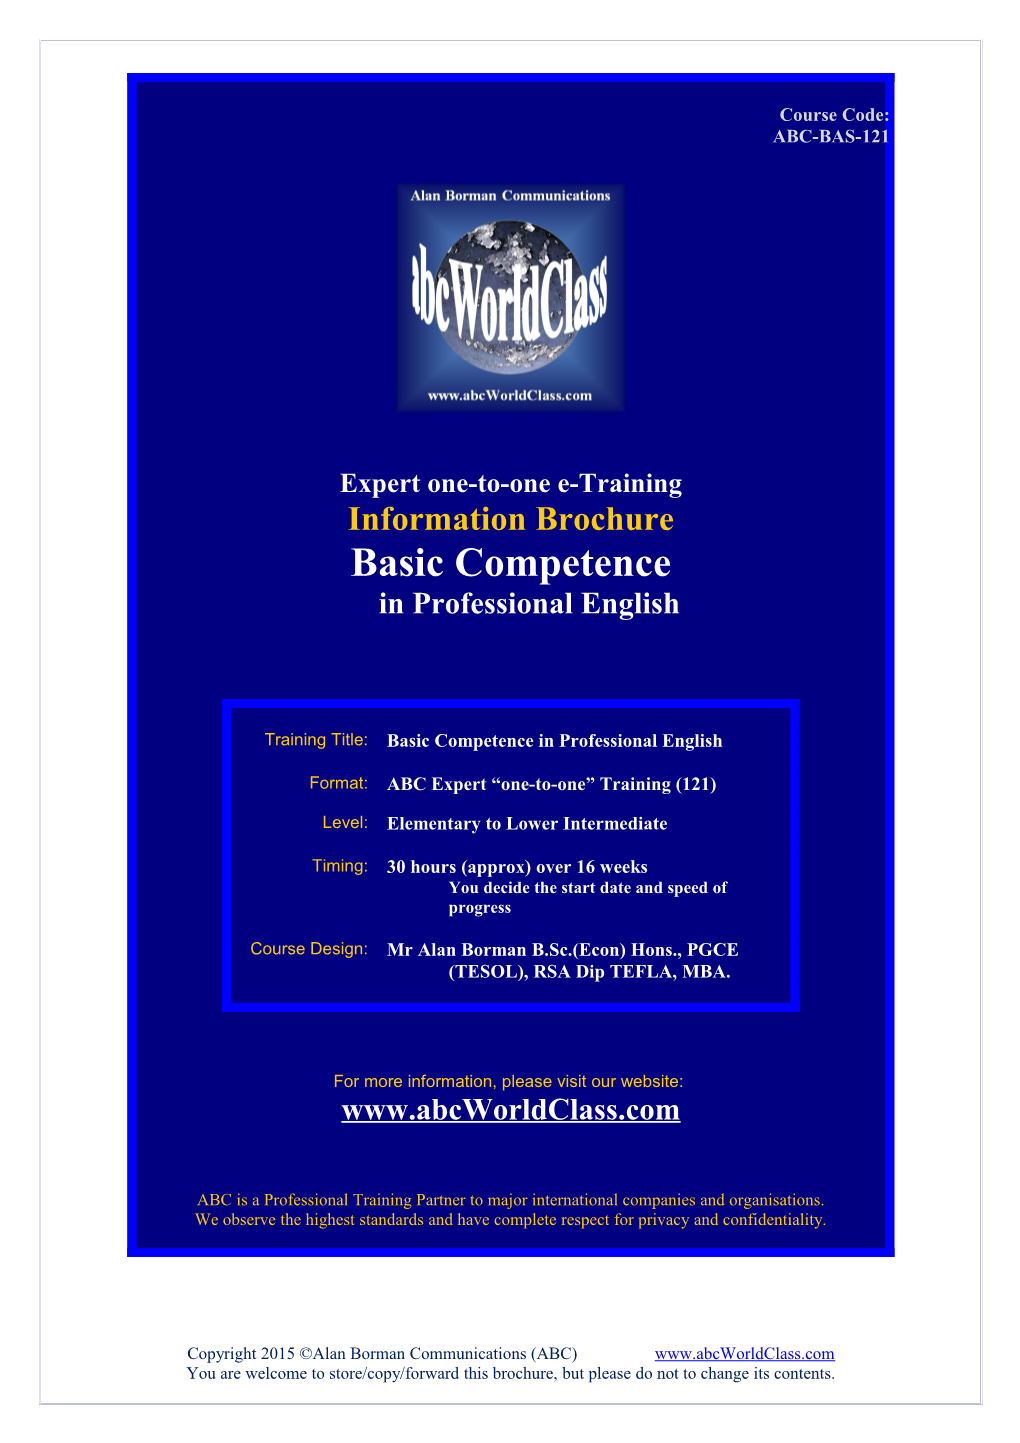 ABC-BAS-121 Basic Competence in Professional English